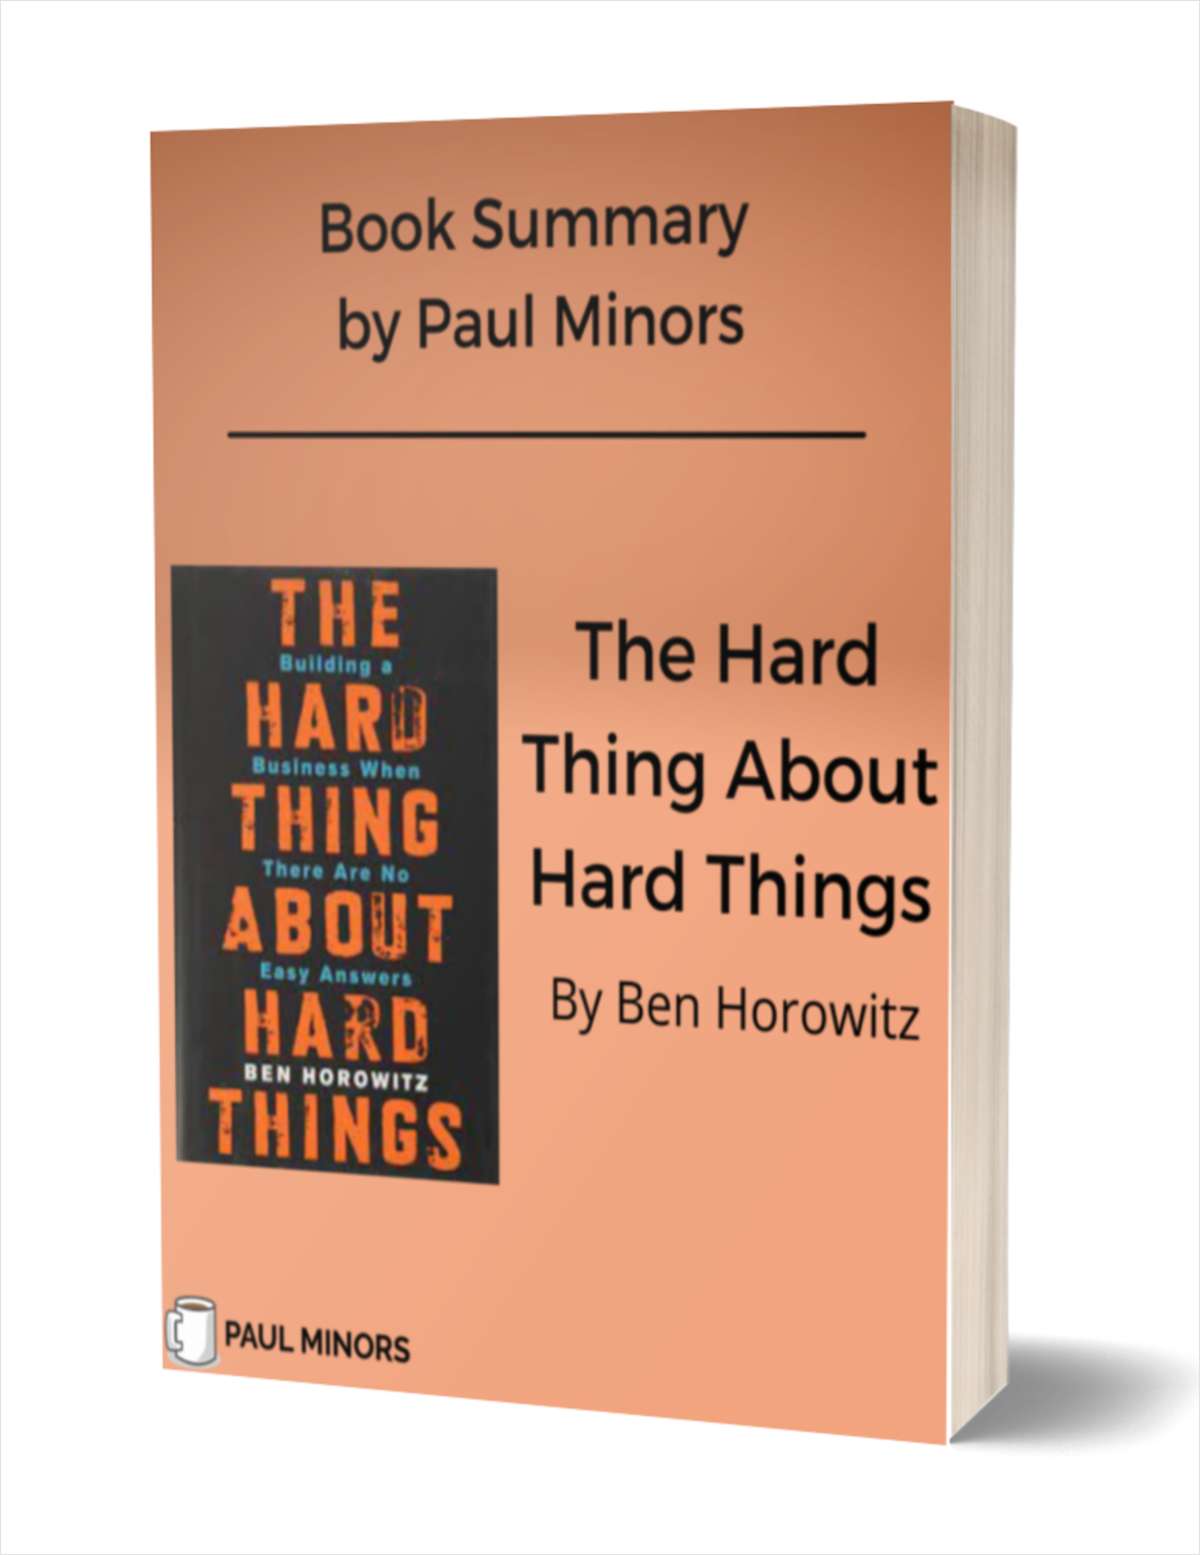 The Hard Thing About Hard Things Book Summary